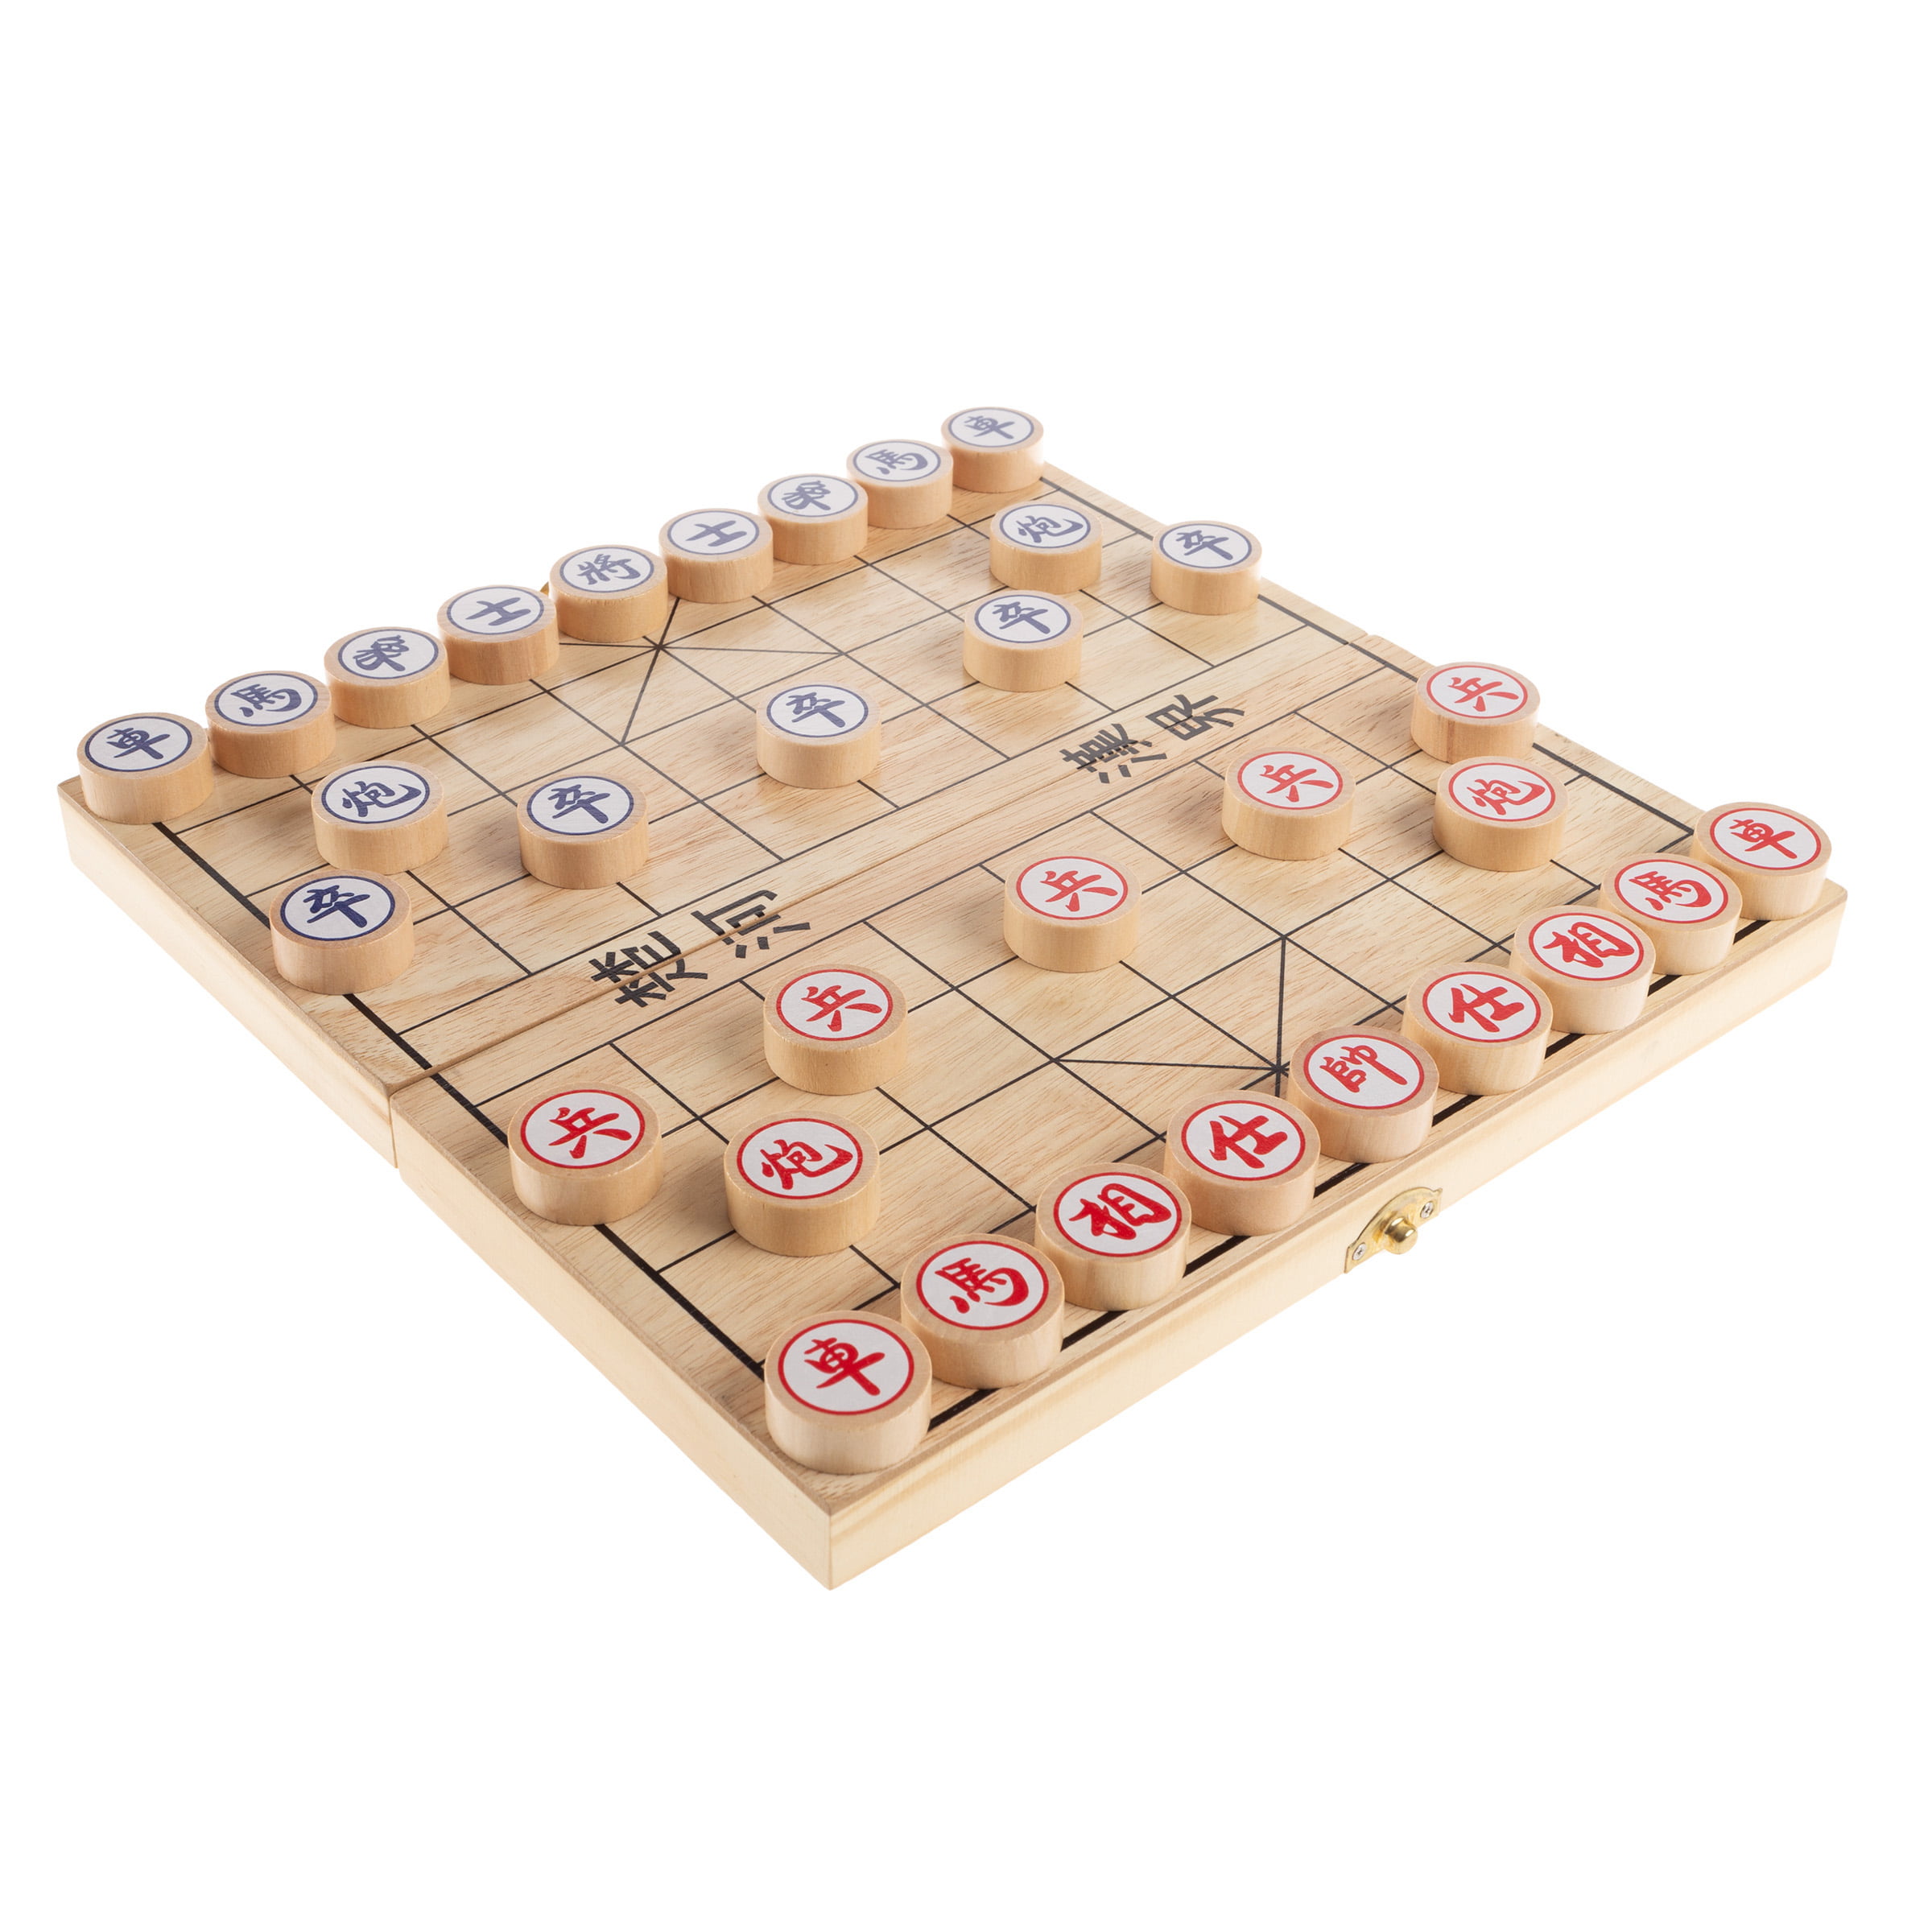 Board Game Box Set - #CNC001# Chinese Number Chess Game 1 